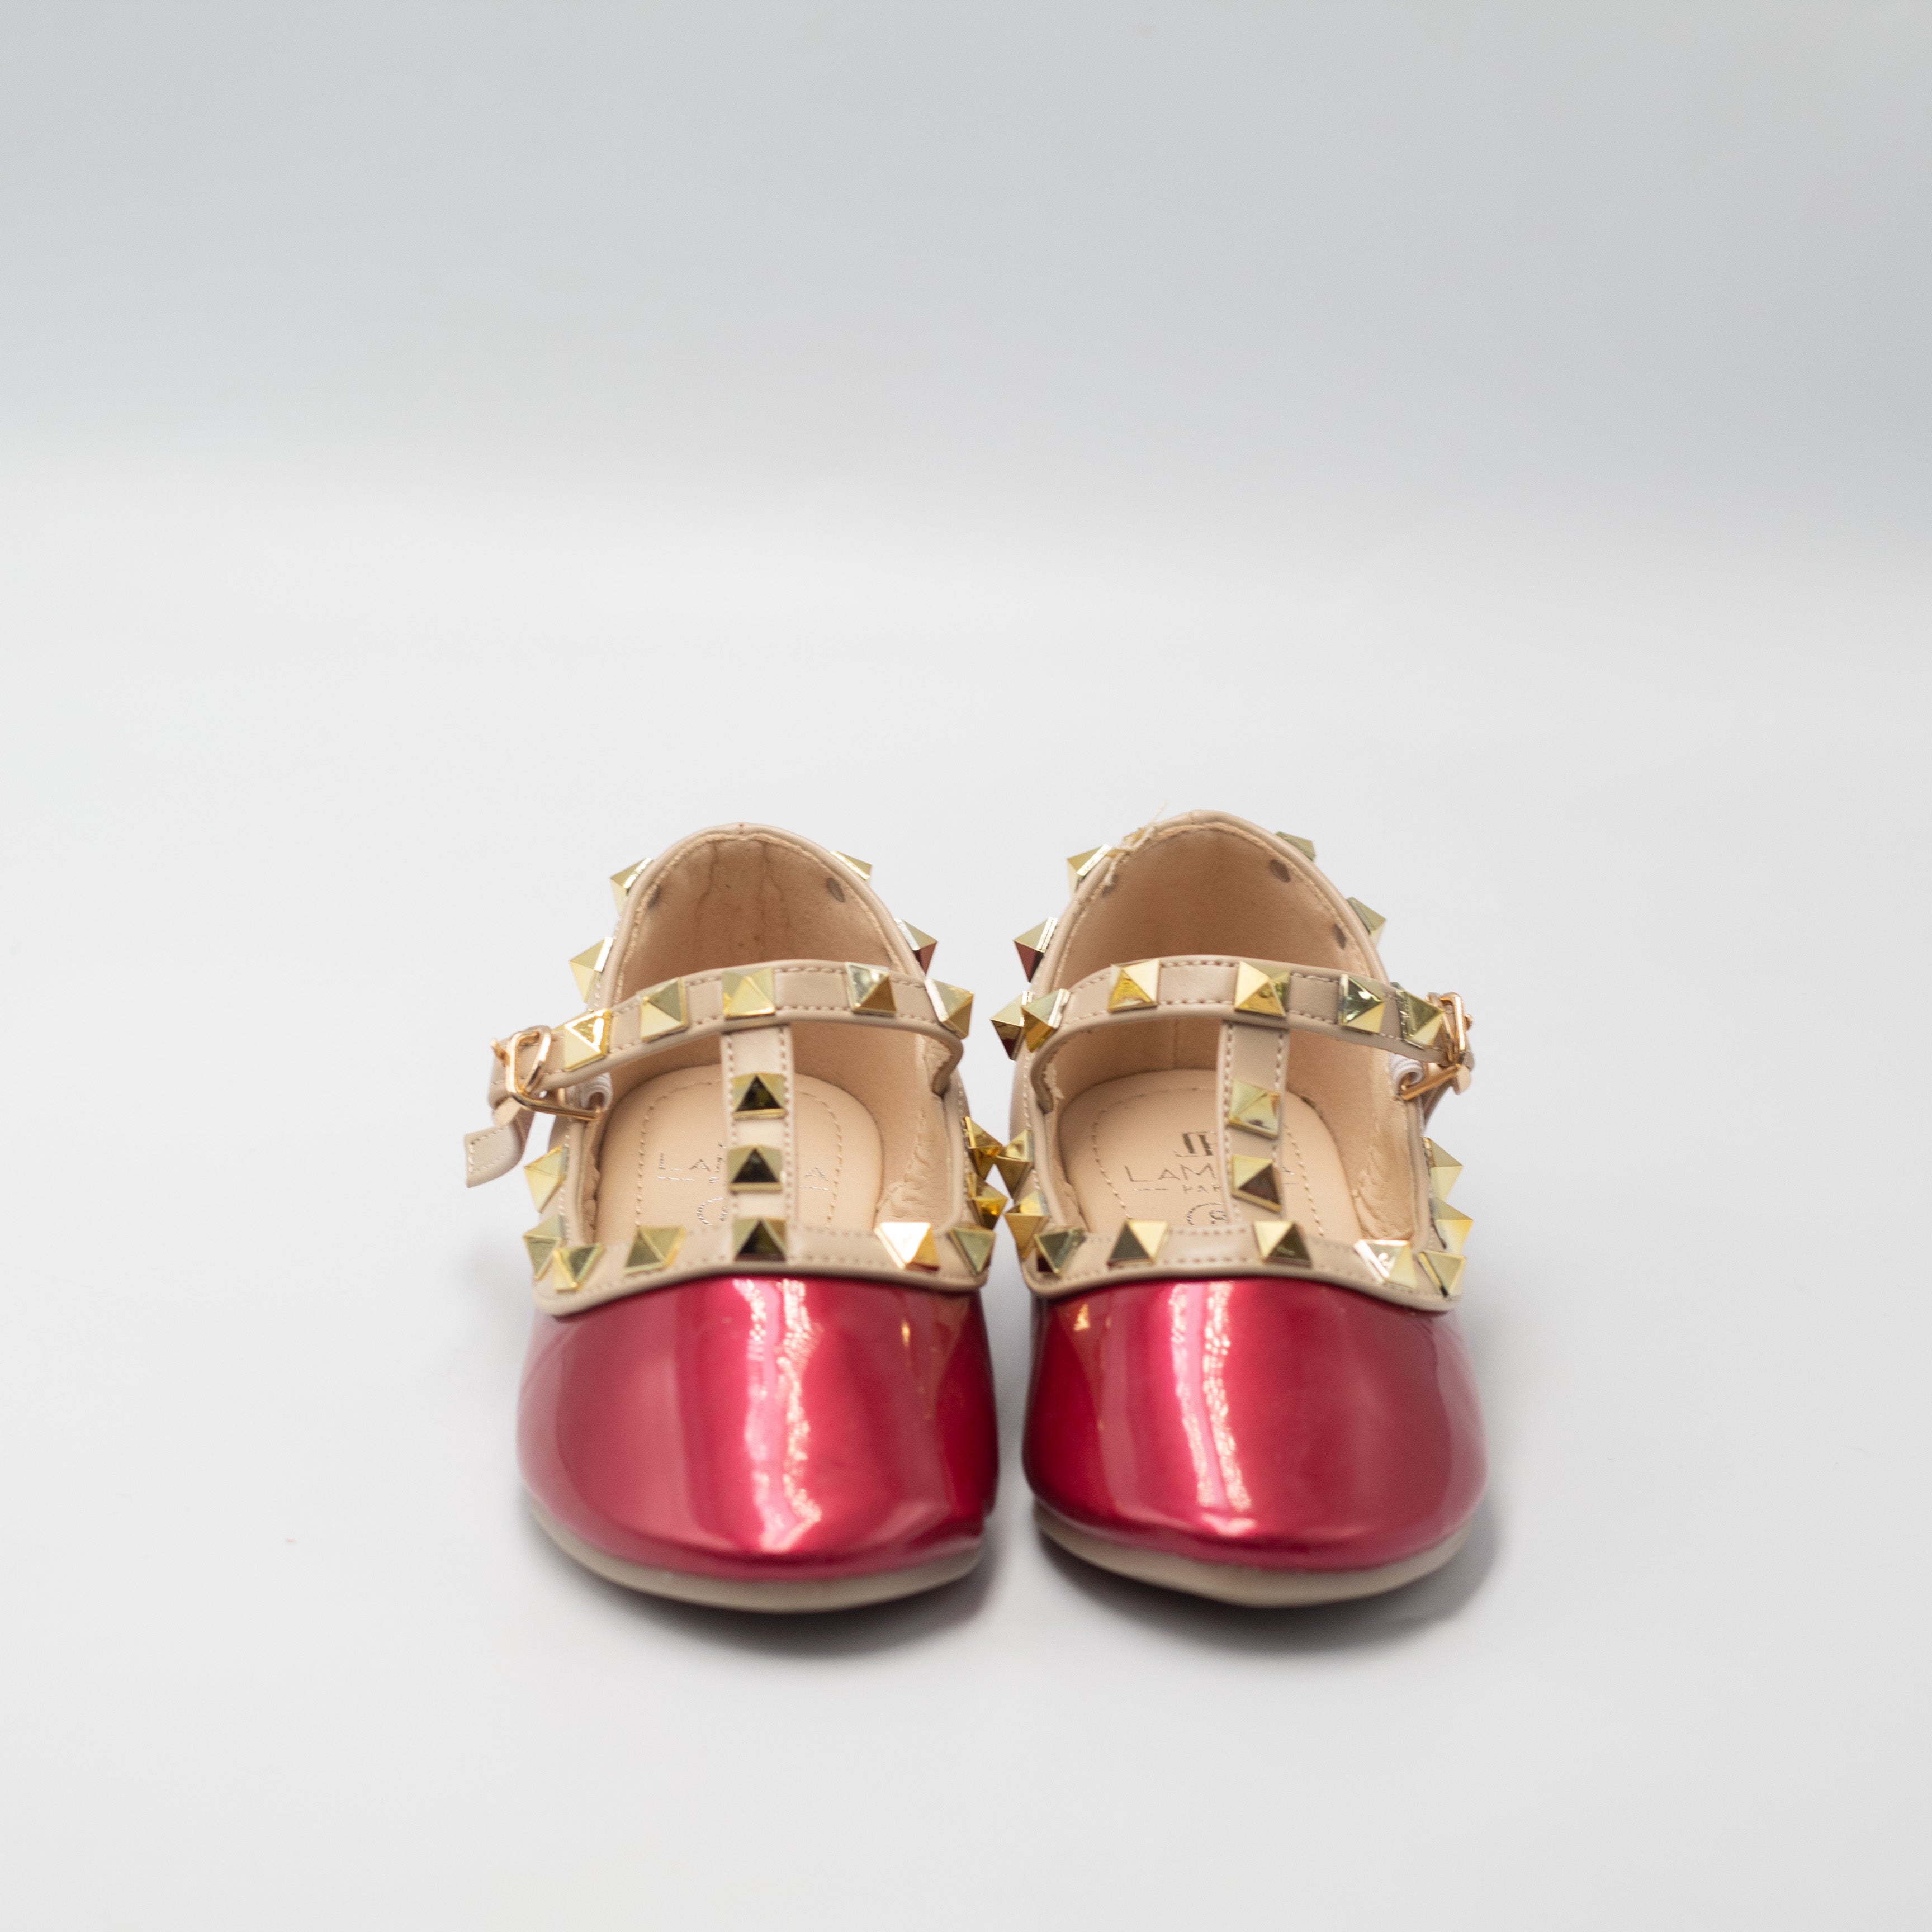 Red girls dress pump with studded detail caria